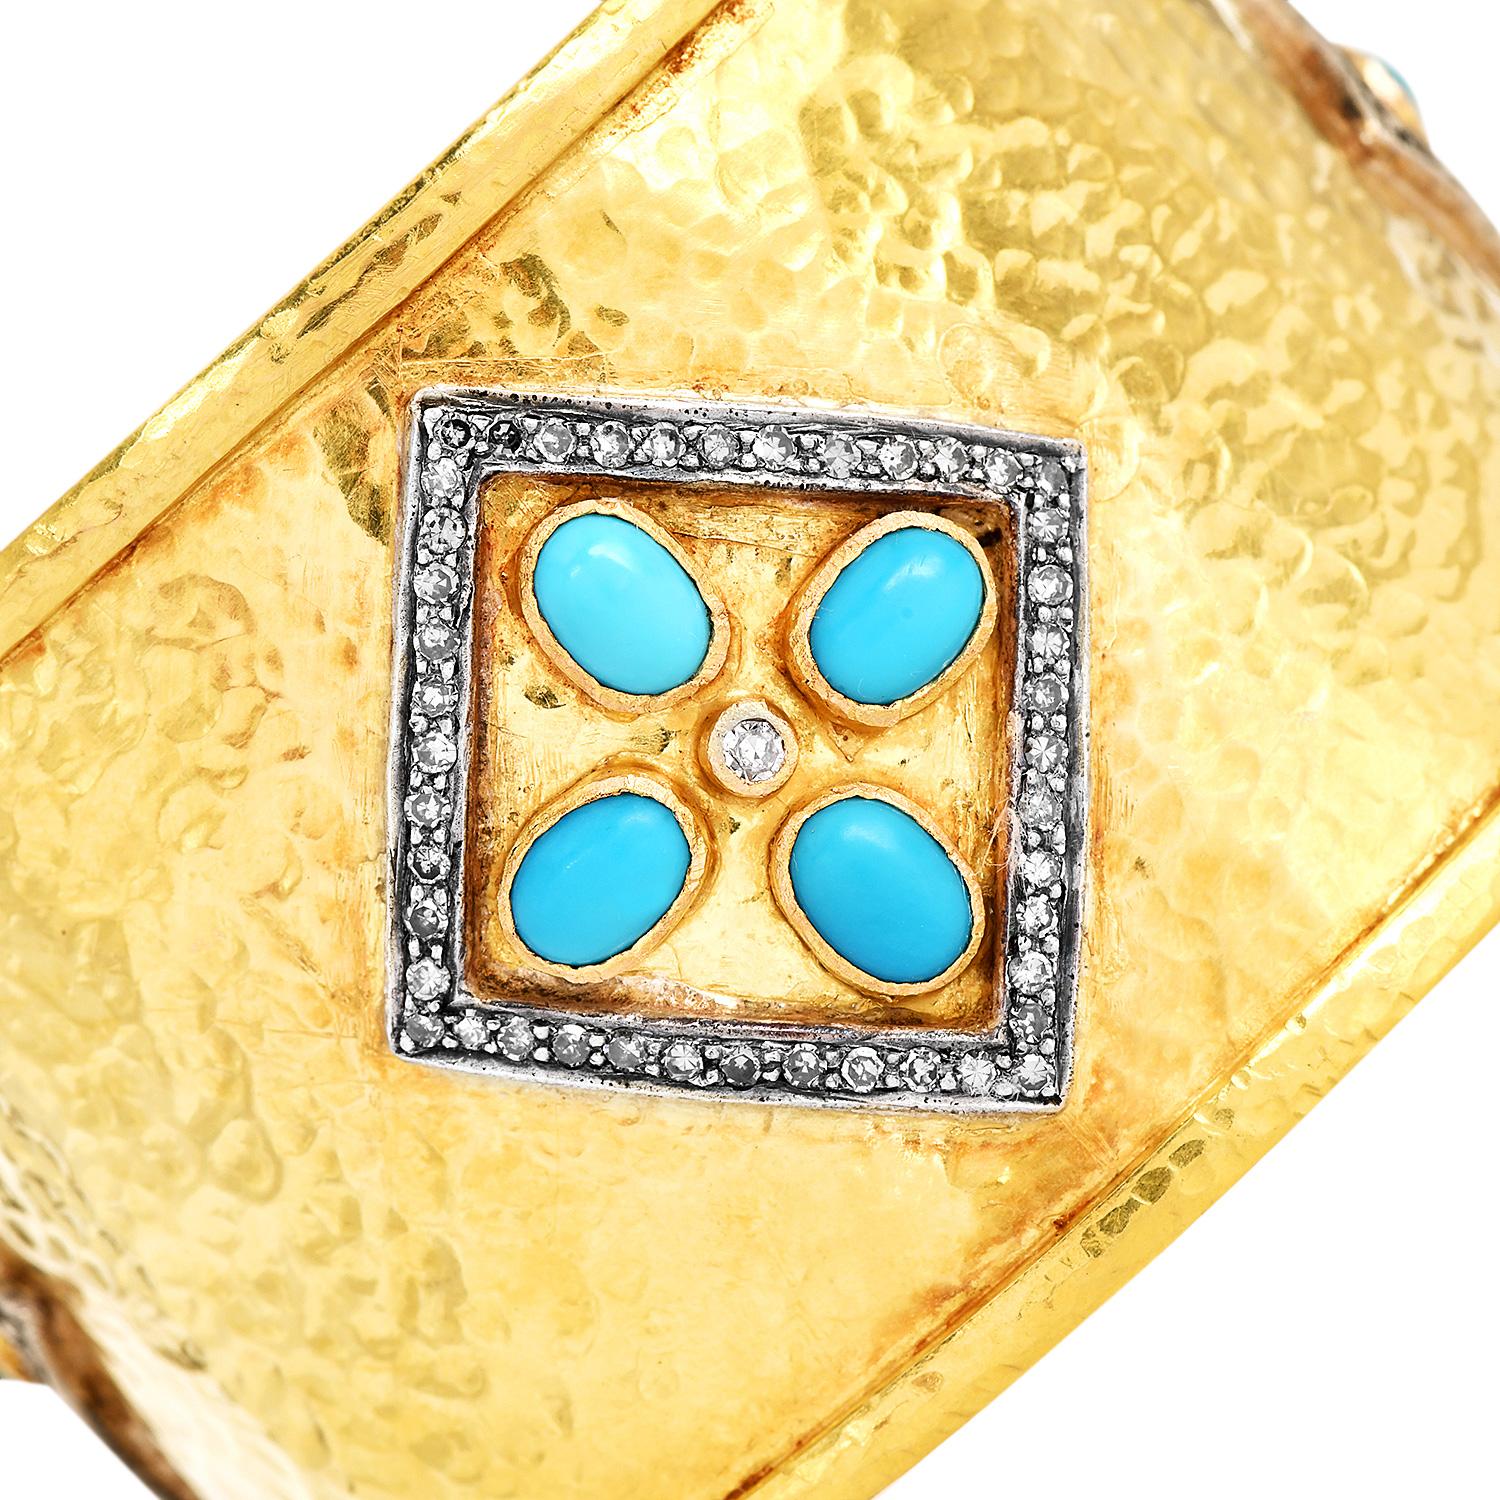 This estate Diamond Turquoise 18K Gold Wide Cuff Bracelet is forged in 18K Yellow gold wide cuff bracelet, hammered textured with a smooth edge and comfortable fit.

Decorated by three kite design with natural champagne diamonds and turquoise